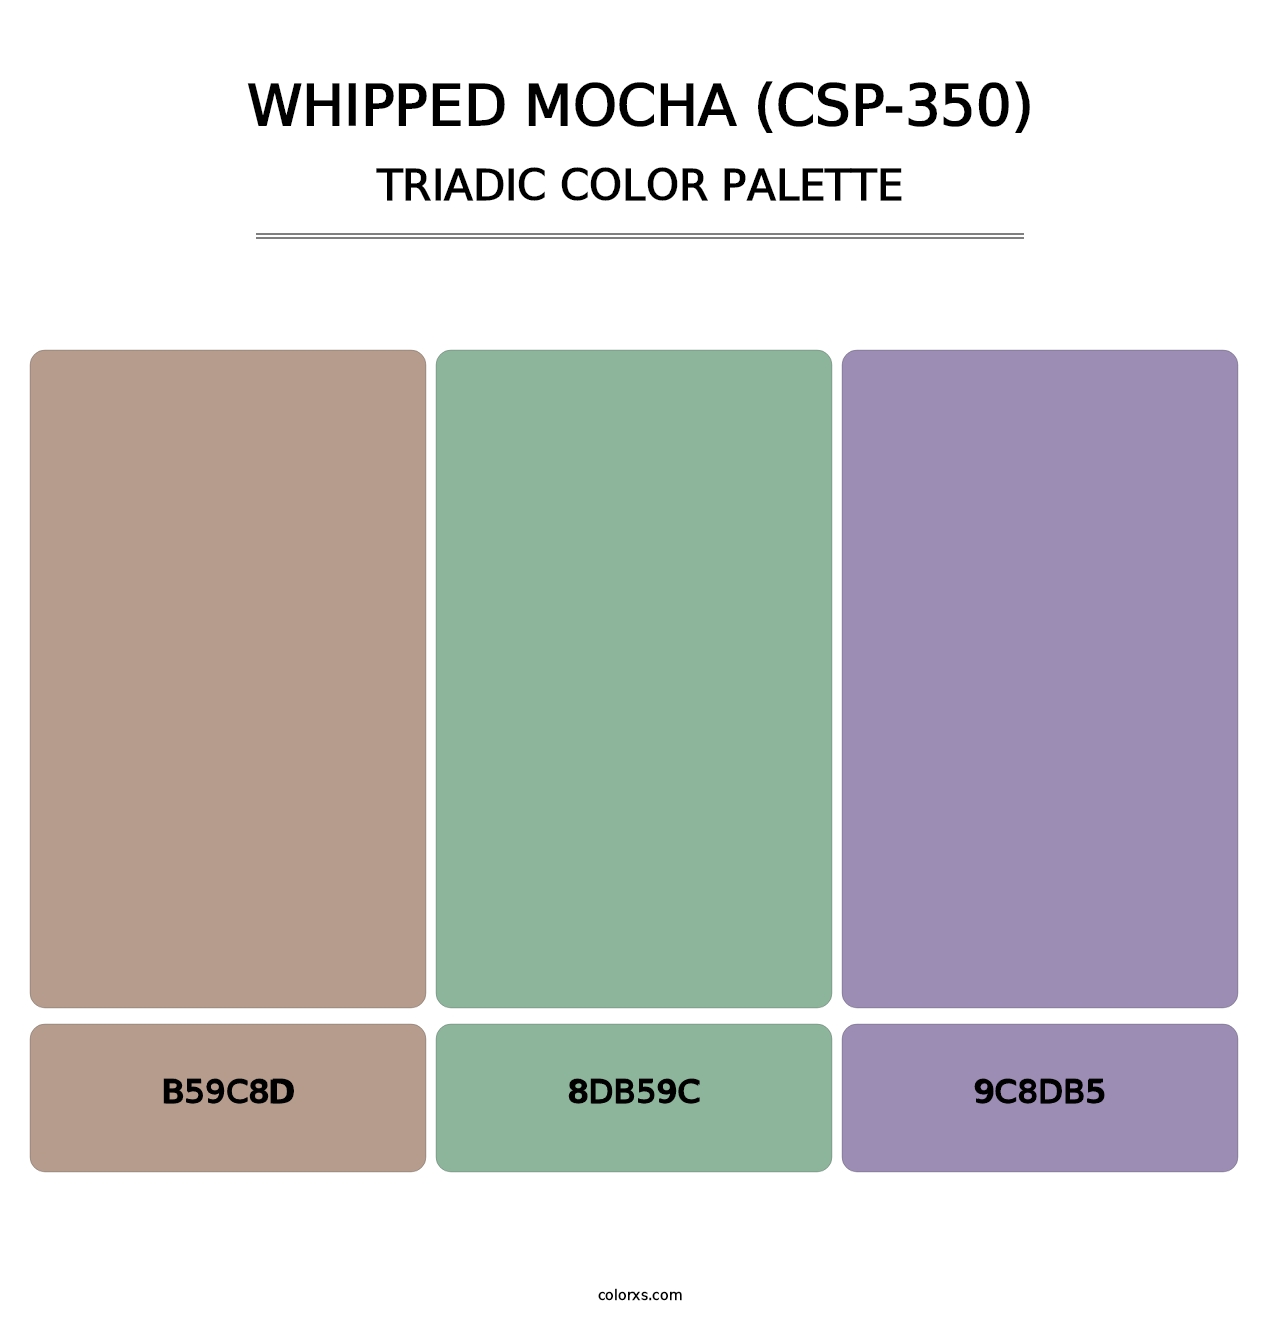 Whipped Mocha (CSP-350) - Triadic Color Palette